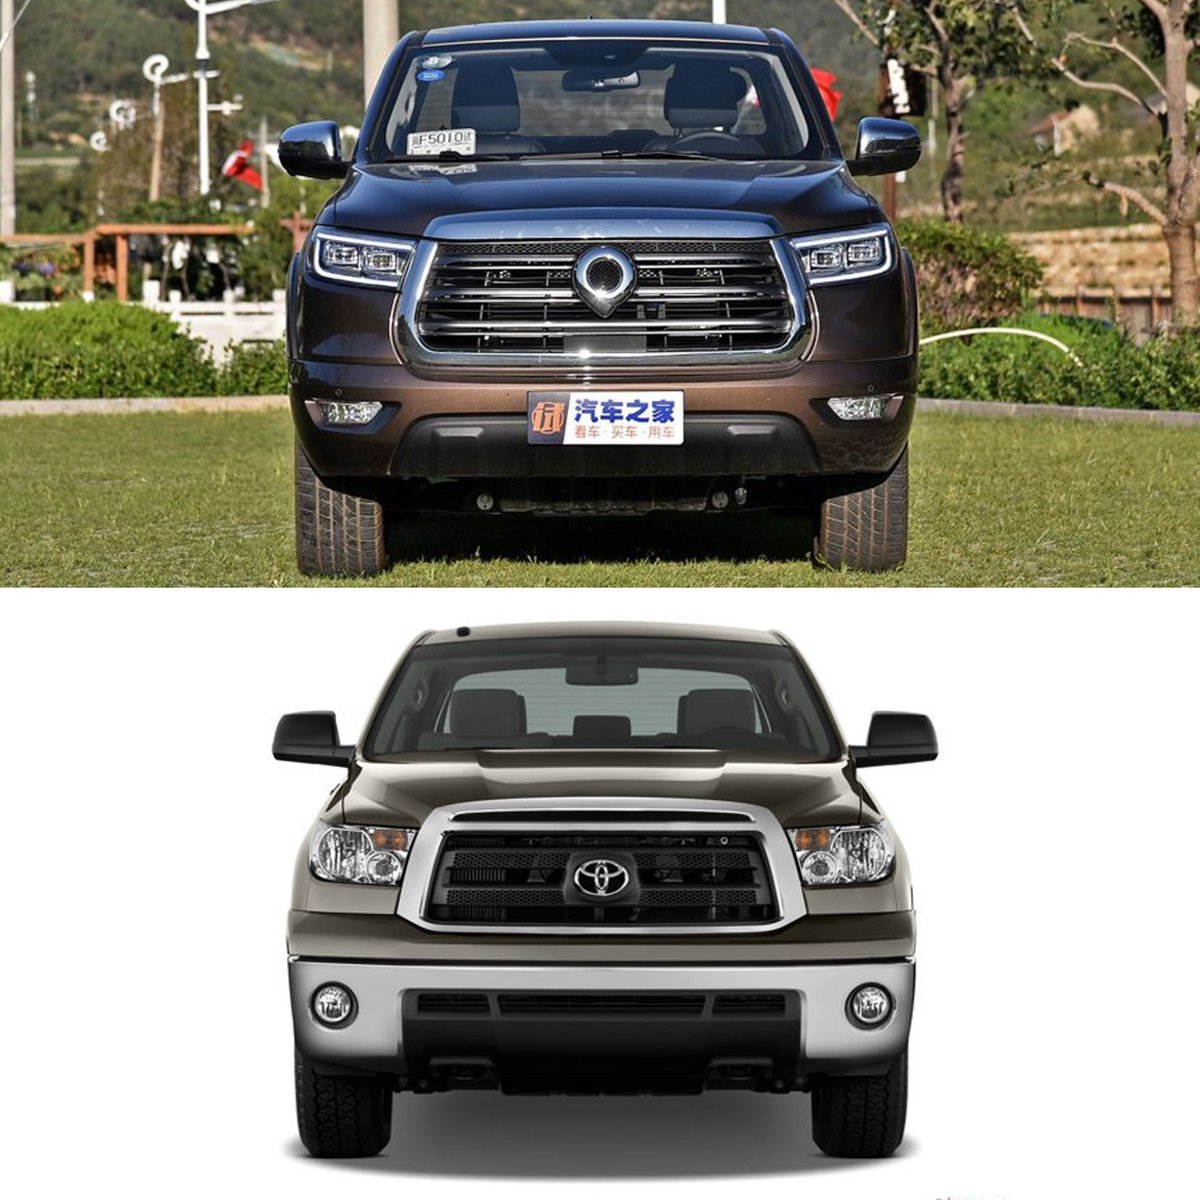 Car Industry Analysis Great Wall S Pao Model Is The First Ever Pickup From A Chinese Brand To Be Classed As A Passenger Vehicle It Reminds Me The 07 Toyotatundra Especially